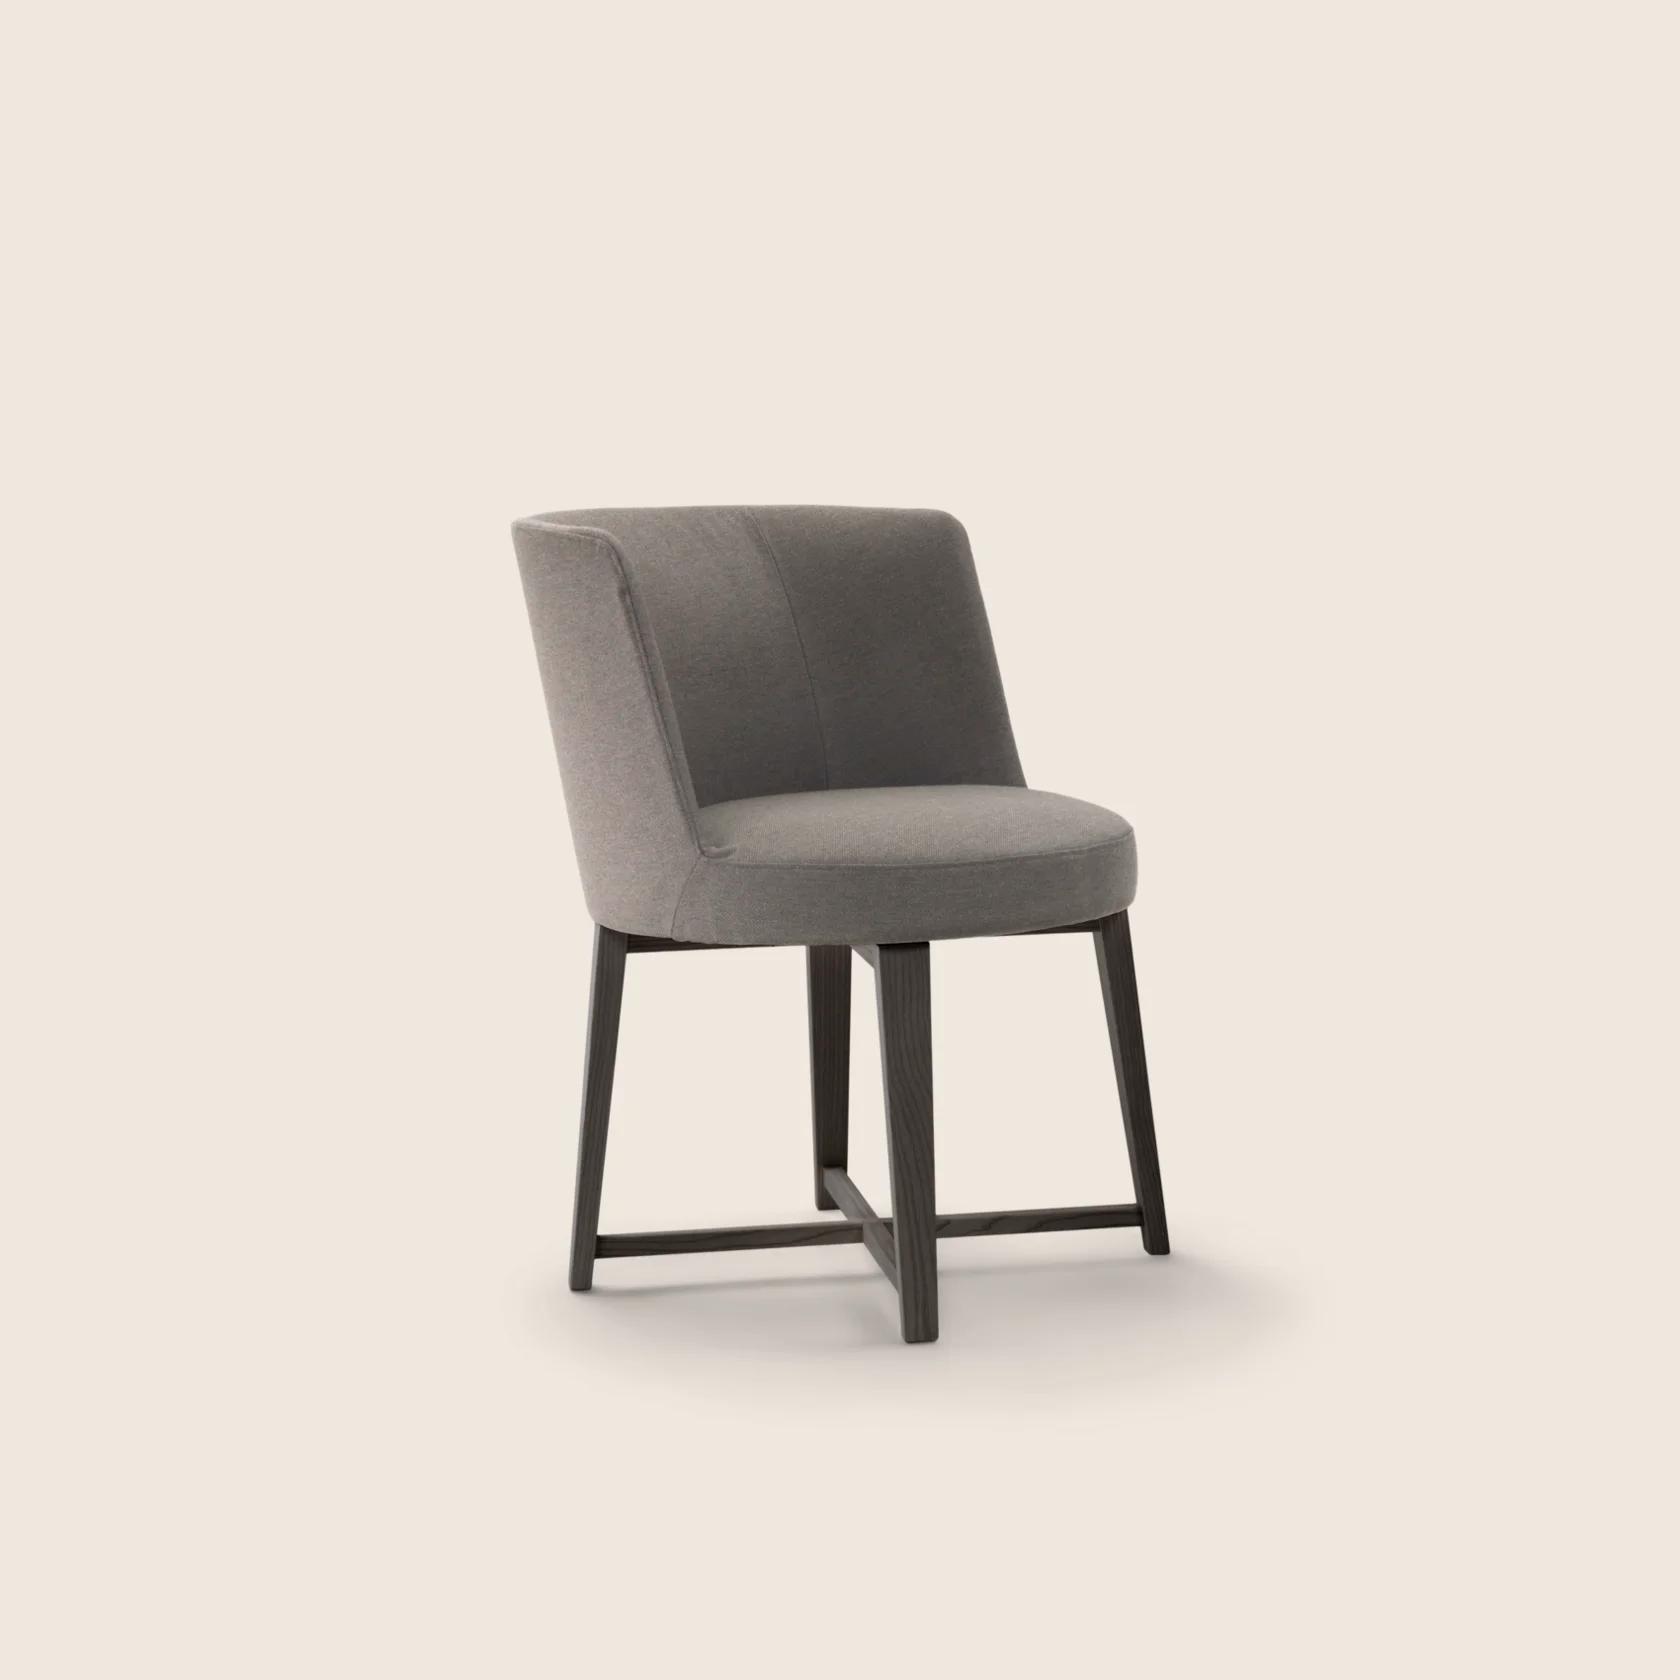 024601_HERA_CHAIR_07.png